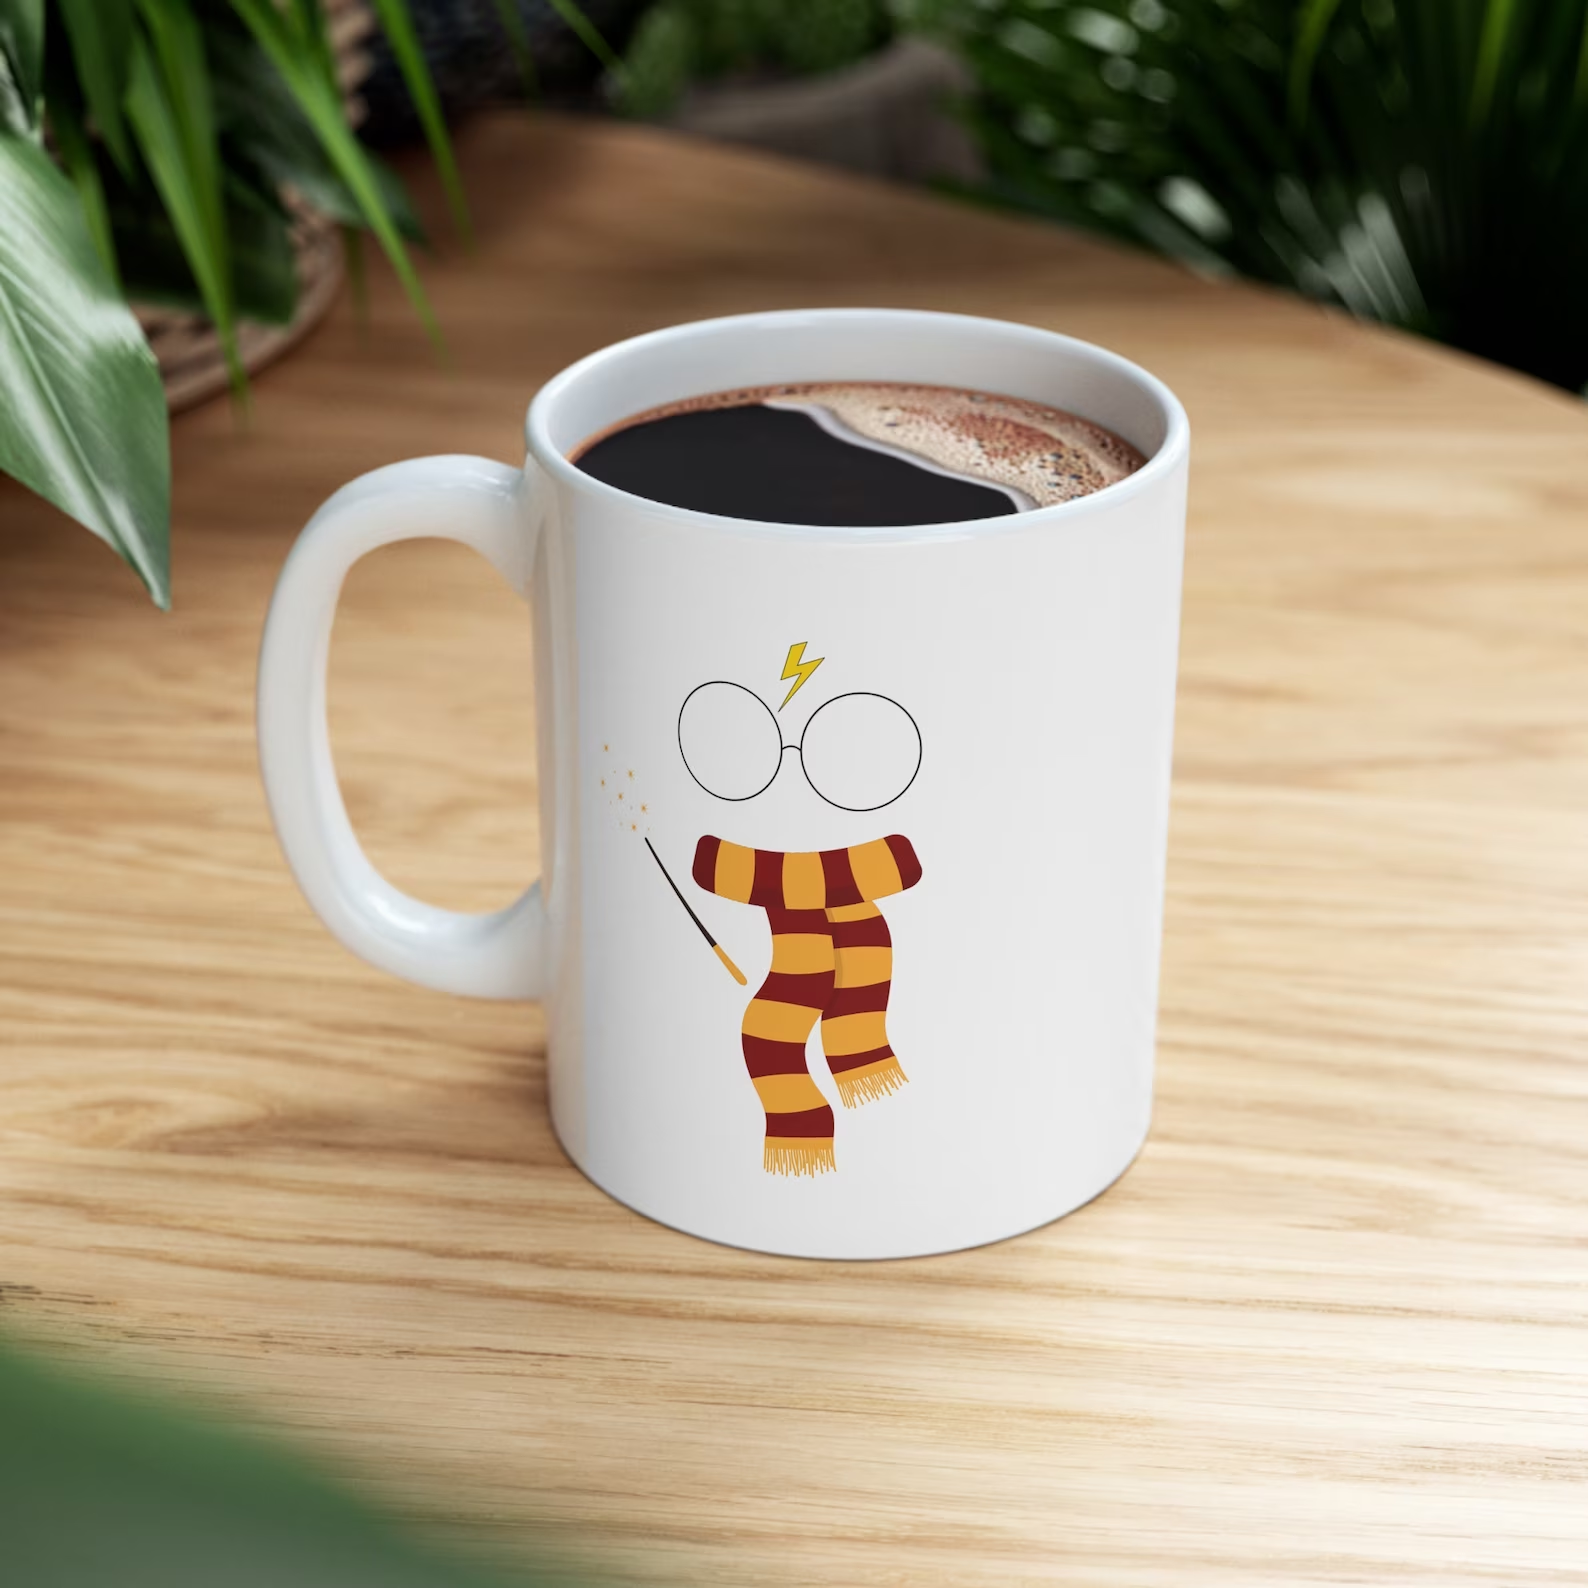 Mug with Harry Potter glasses, scar and House scarf